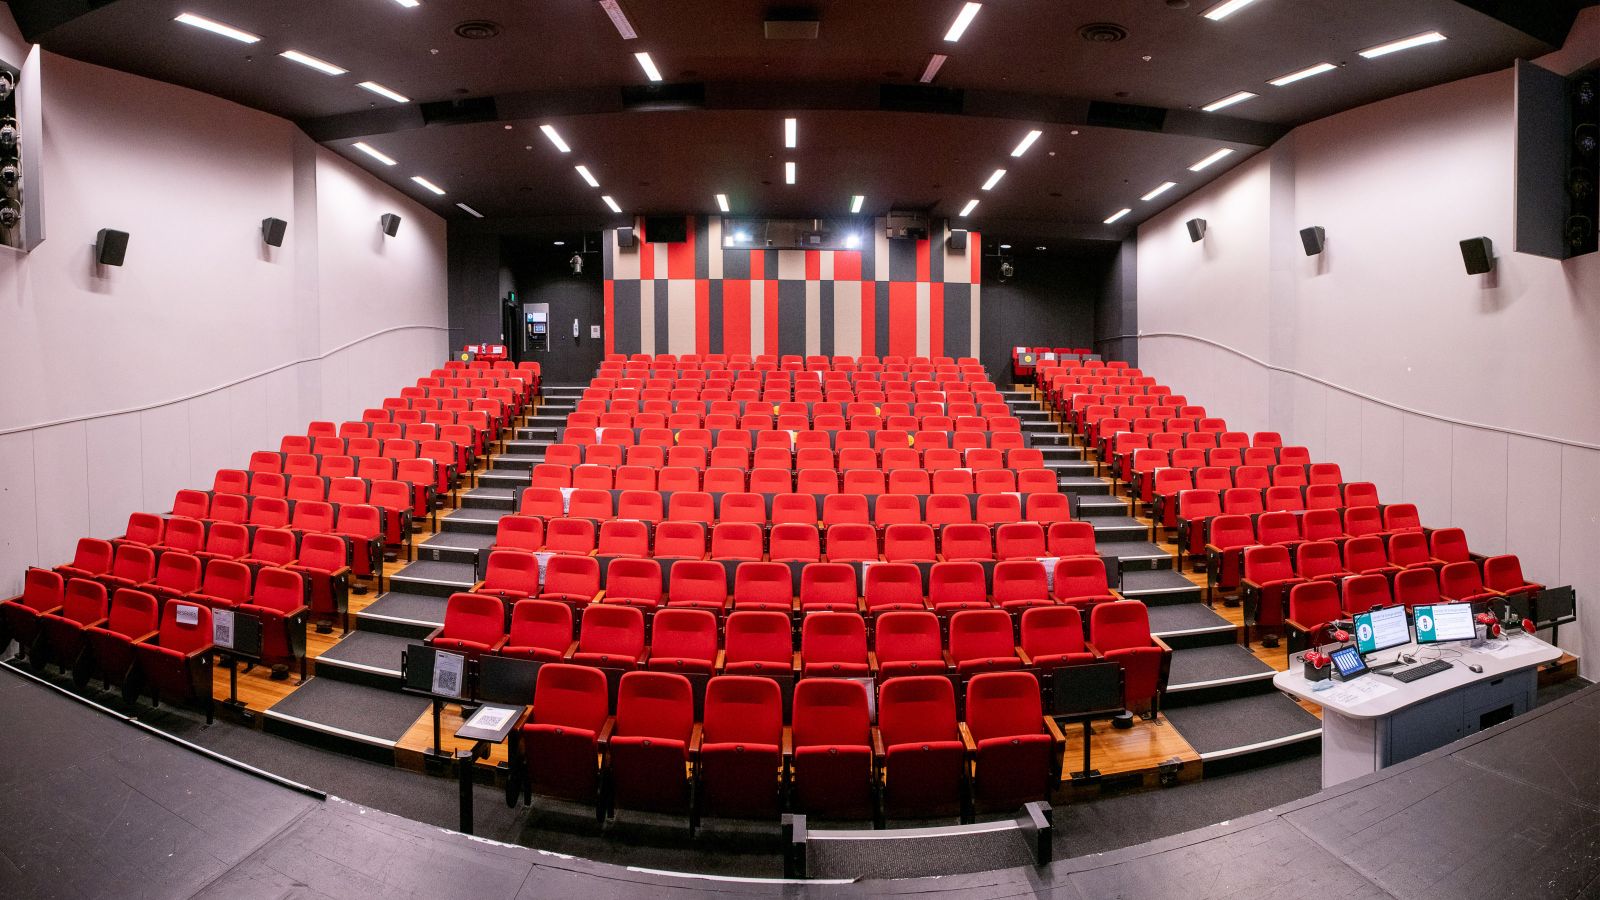 View of Memorial Theatre from front of auditorium. Shows bank of tiered red coloured seating.